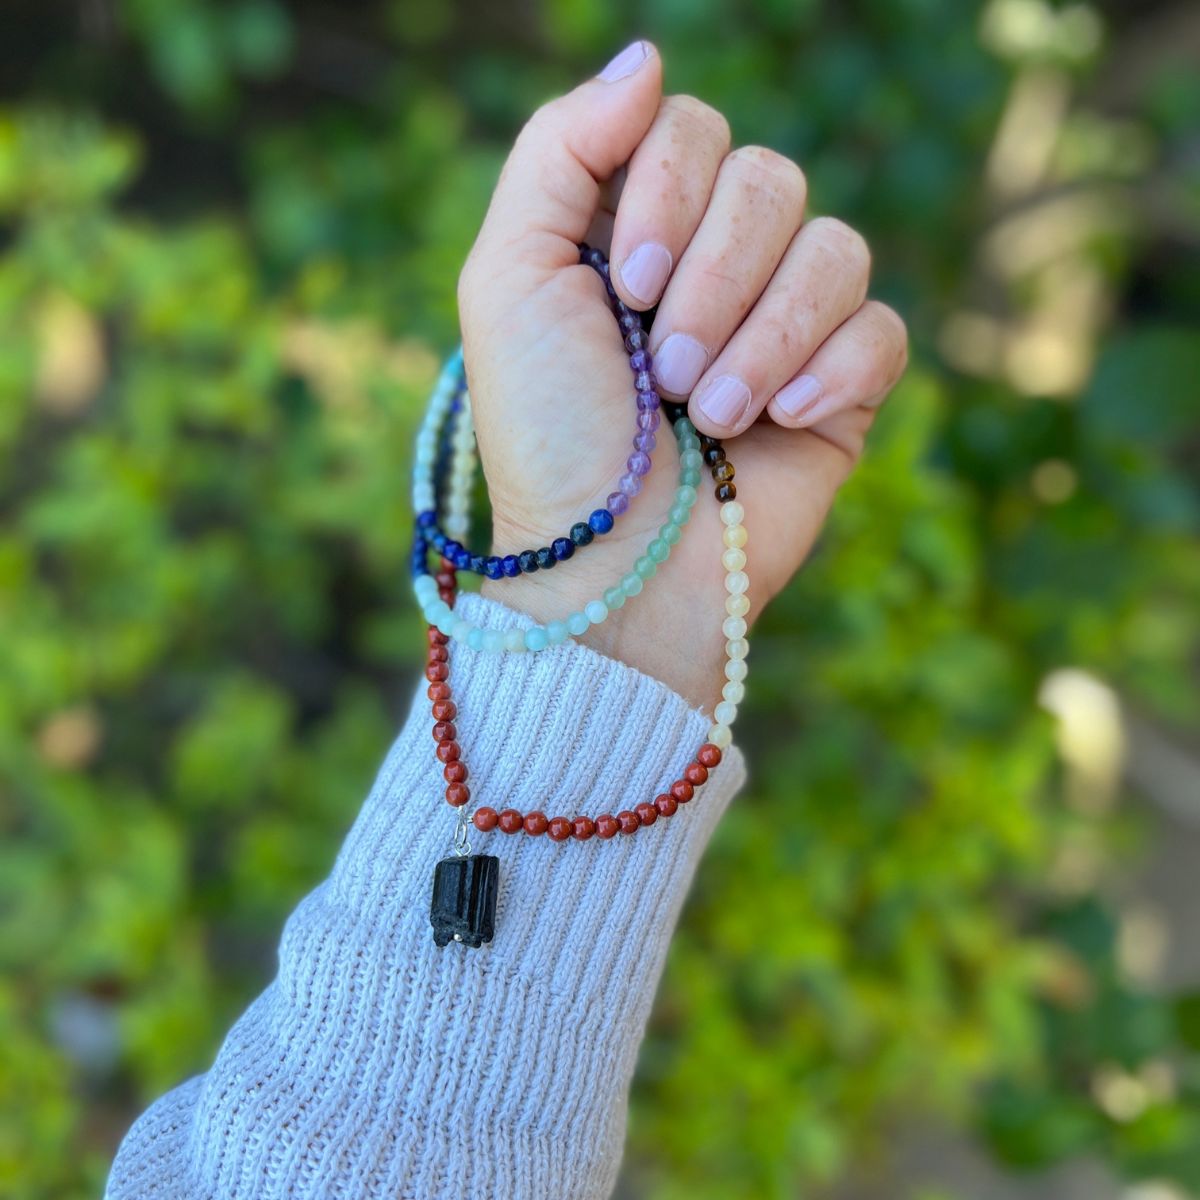 The chakras, or energy points, that exist within each of us, guide us as we come into our spiritual power. This Flowing Energy Chakra Necklace helps you align your chakras and enables a continuous energy flow. 